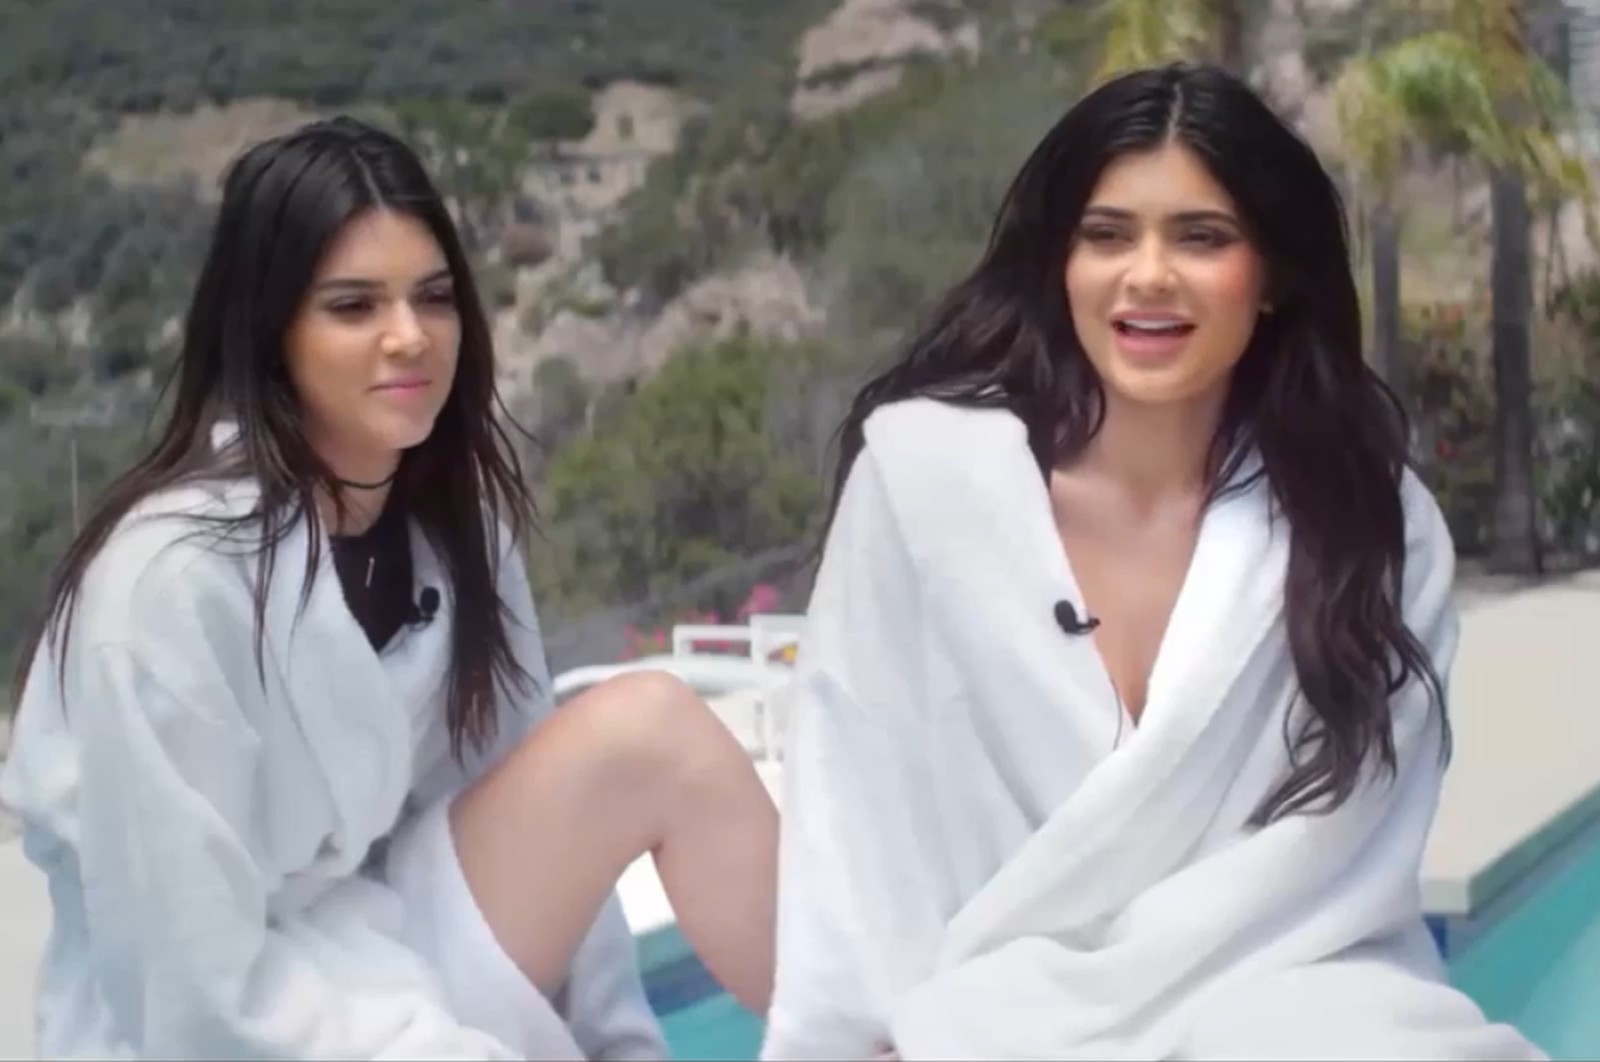 Kendall and Kylie Jenner in interview for Kendall + Kylie Swimwear at Topshop